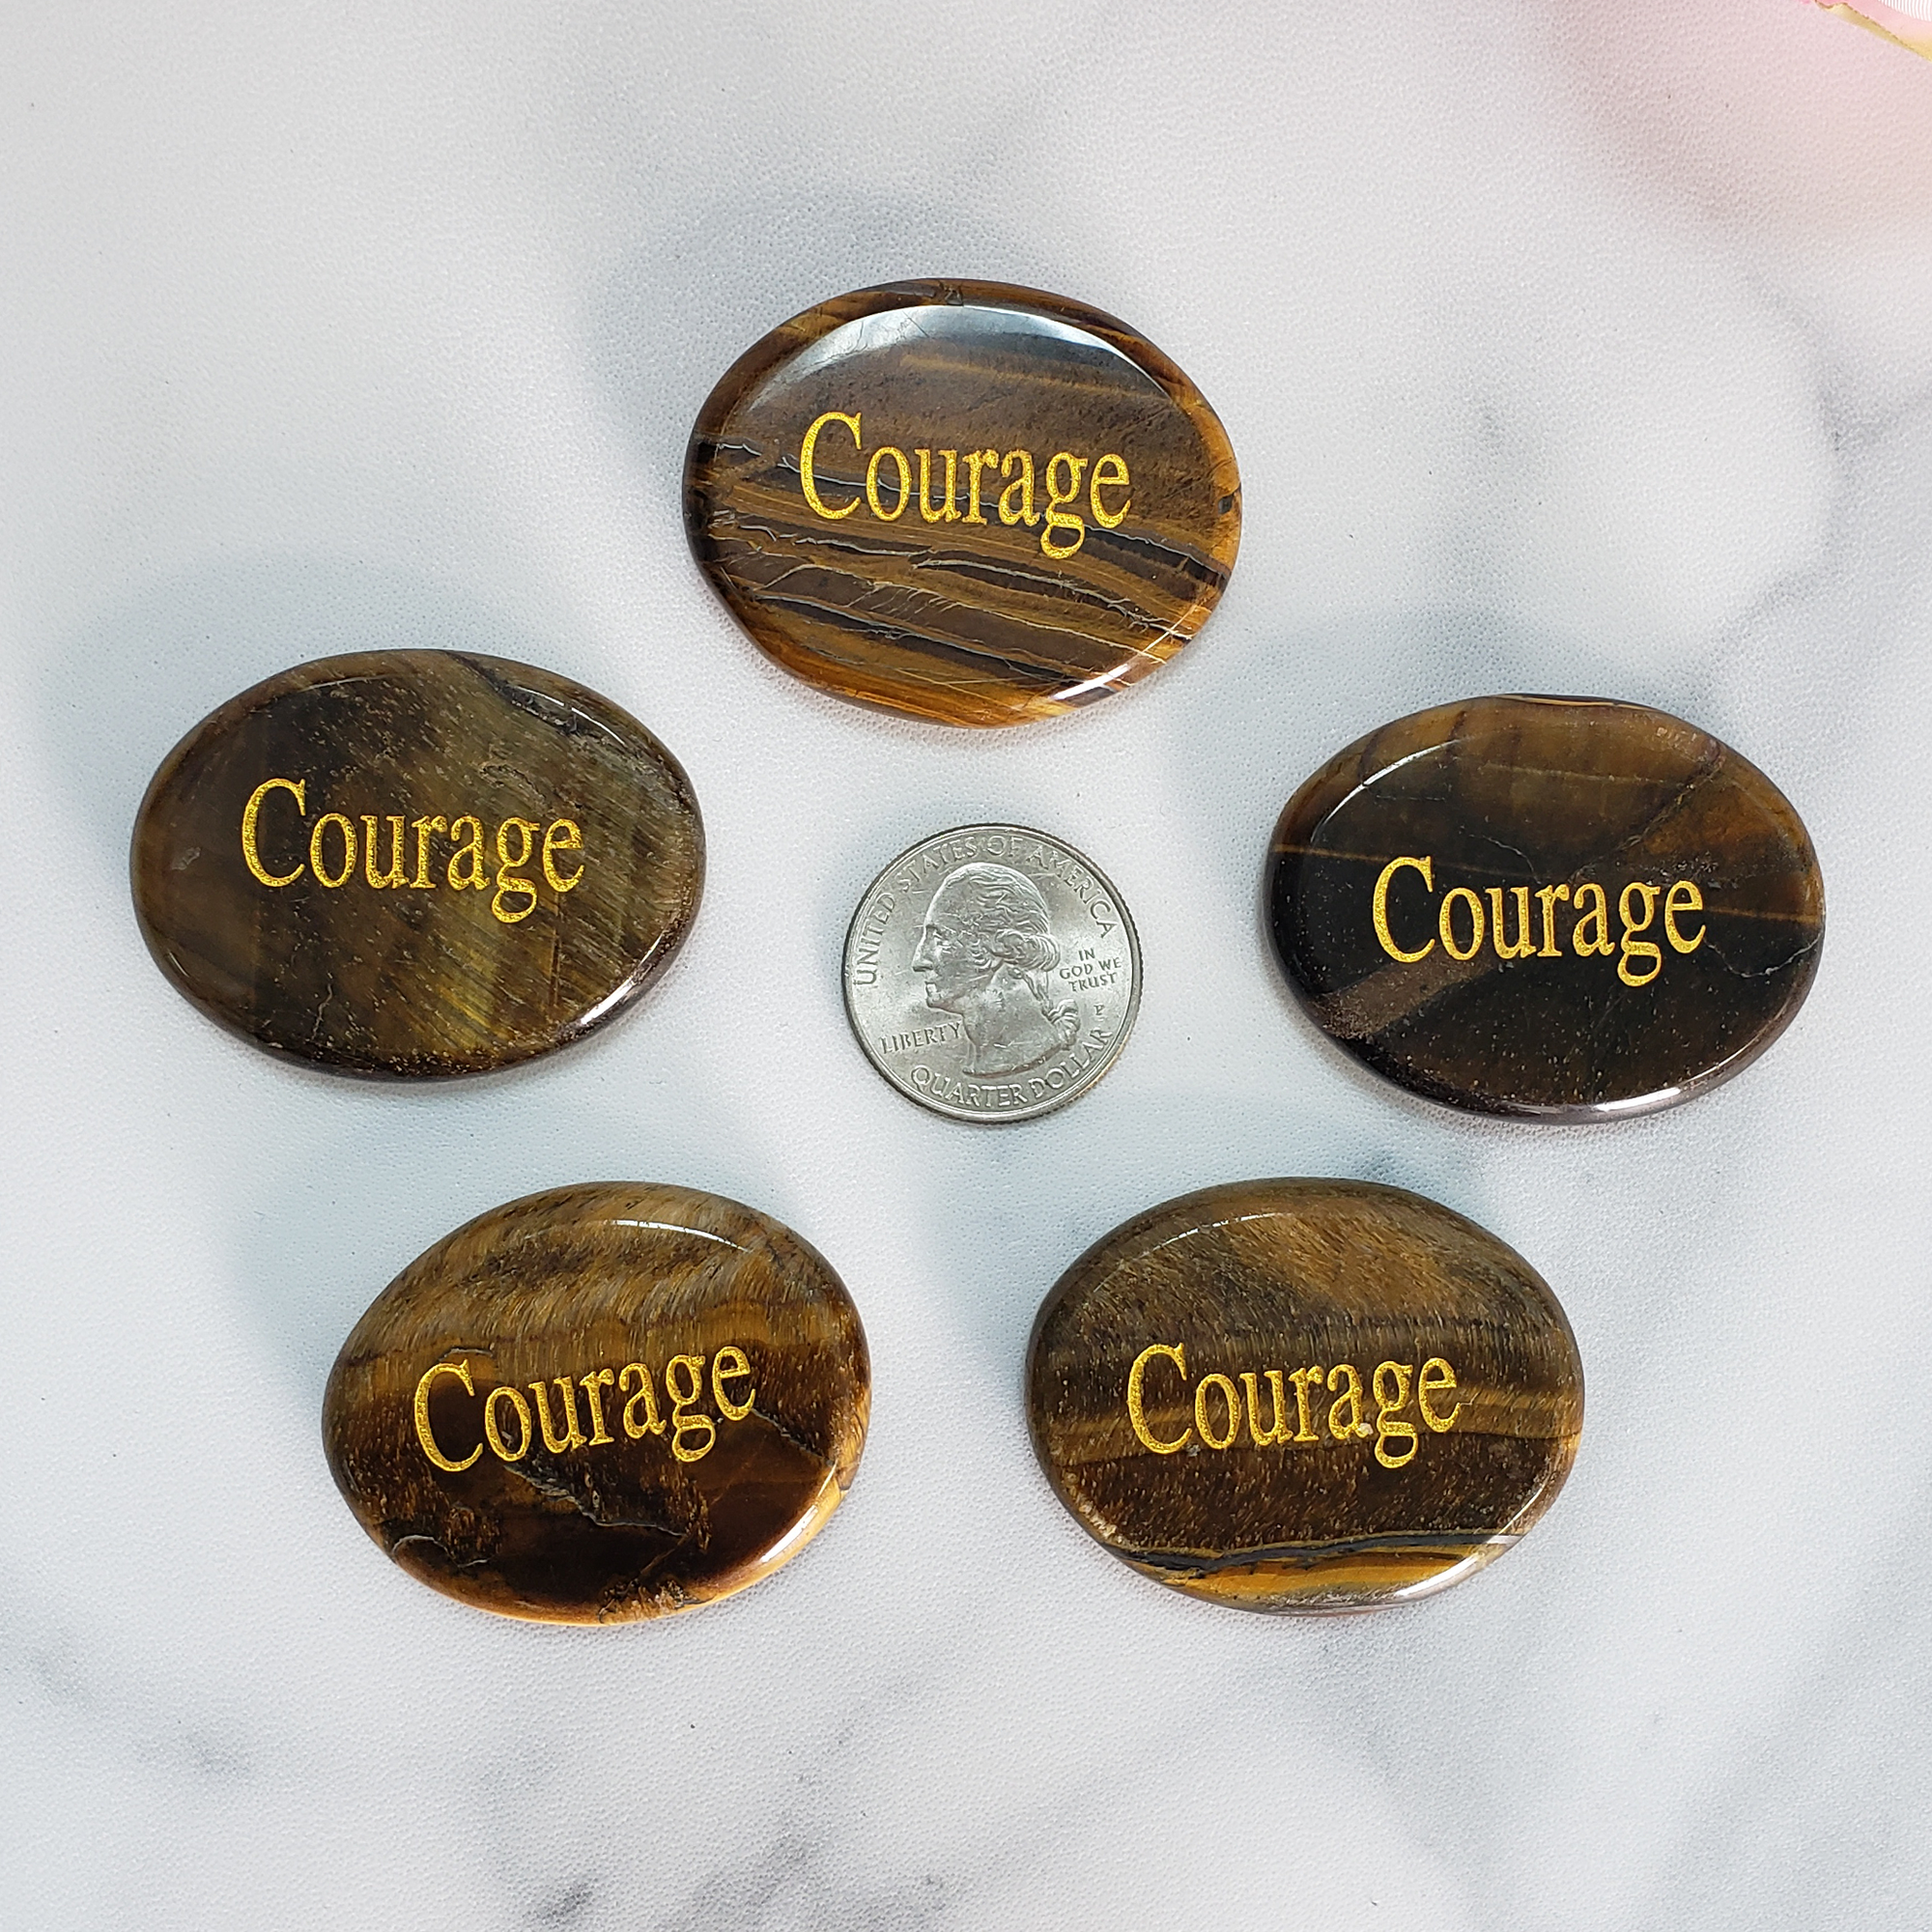 Tigers Eye Courage Affirmation Palm Stone | Natural Crystal Worry Stone with "Courage" Engraving - Size Comparison